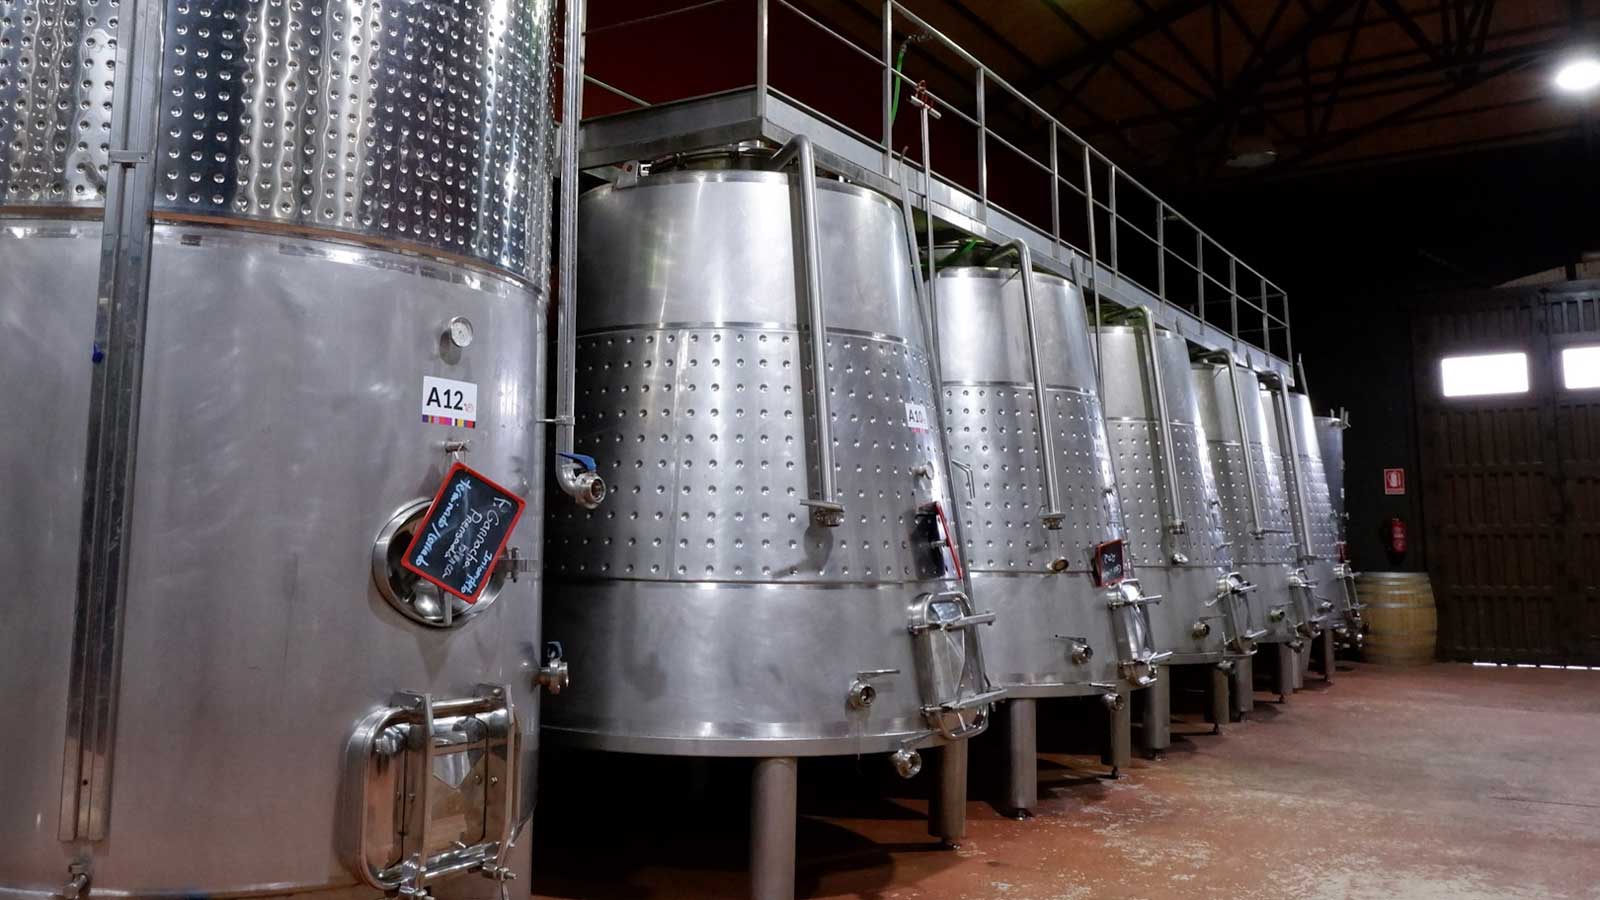 Stainless steel fermenting wine tanks in a Spanish winery